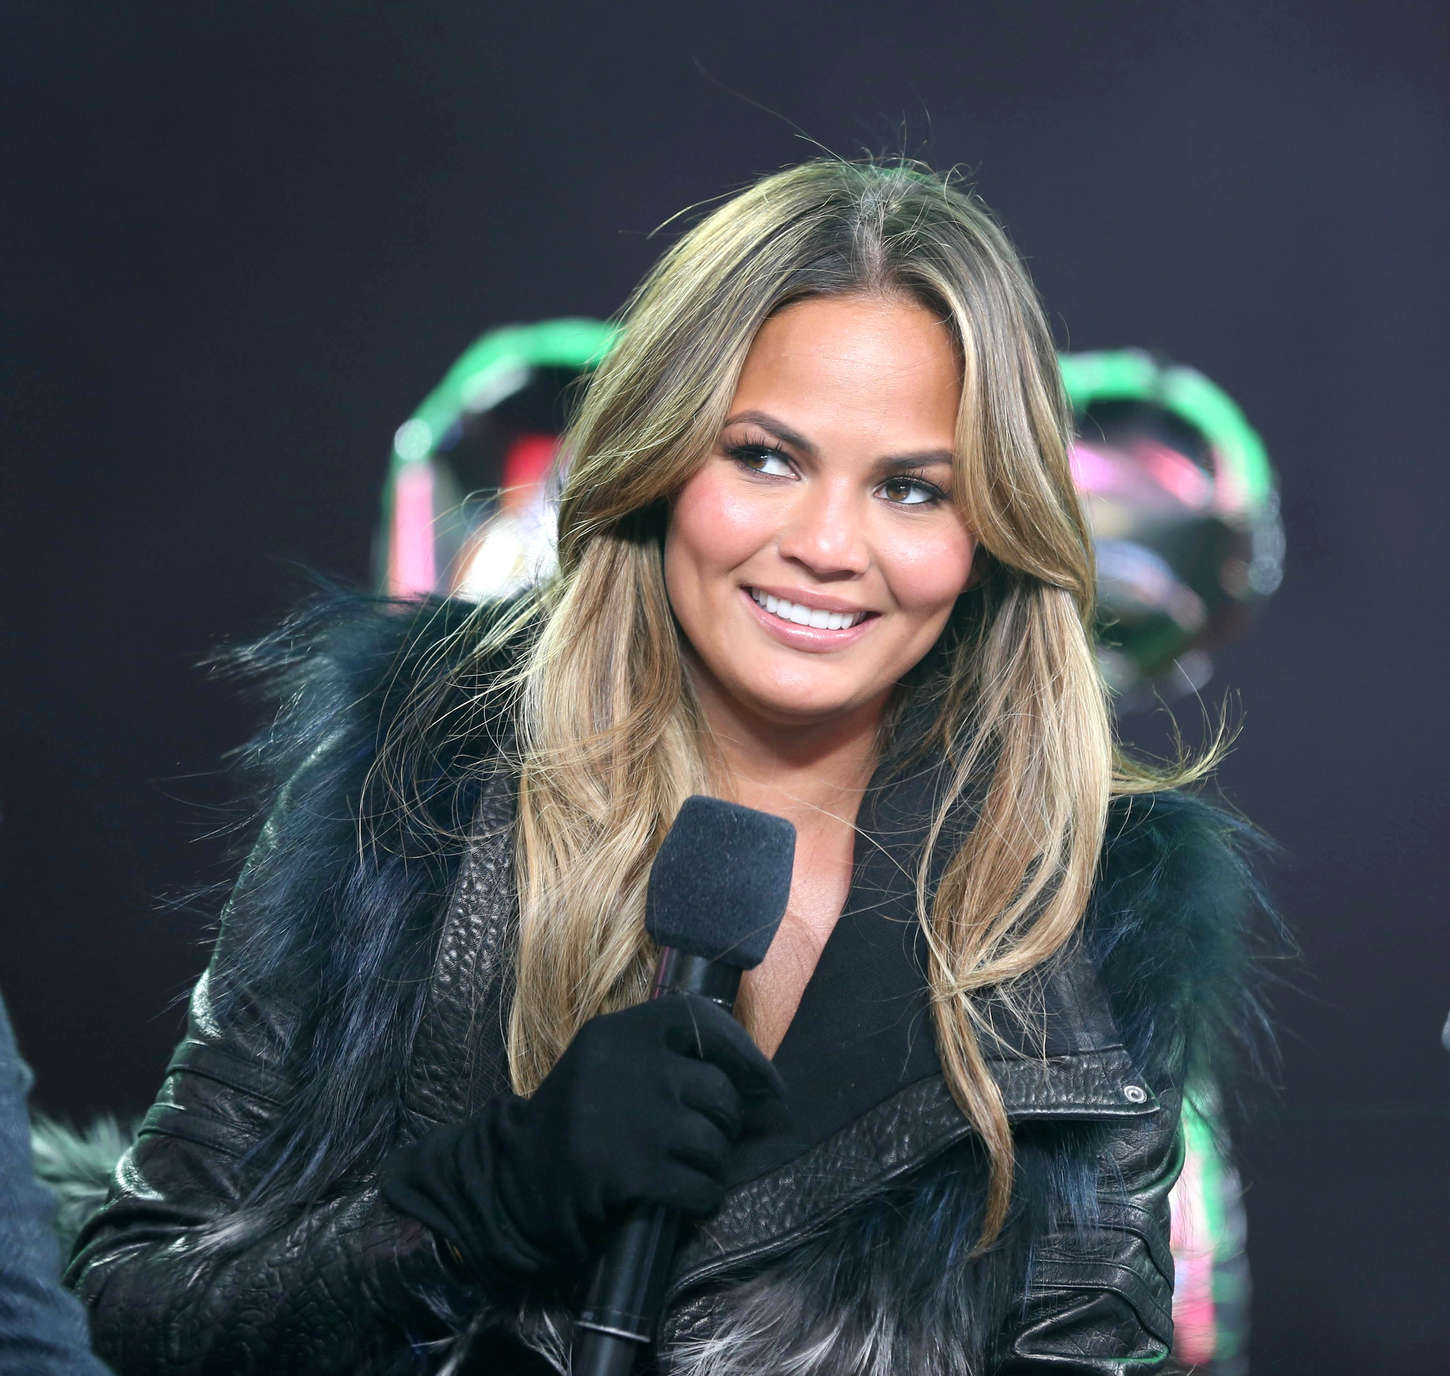 Chrissy Teigen attends New Year’s Eve at Times Square in NYC